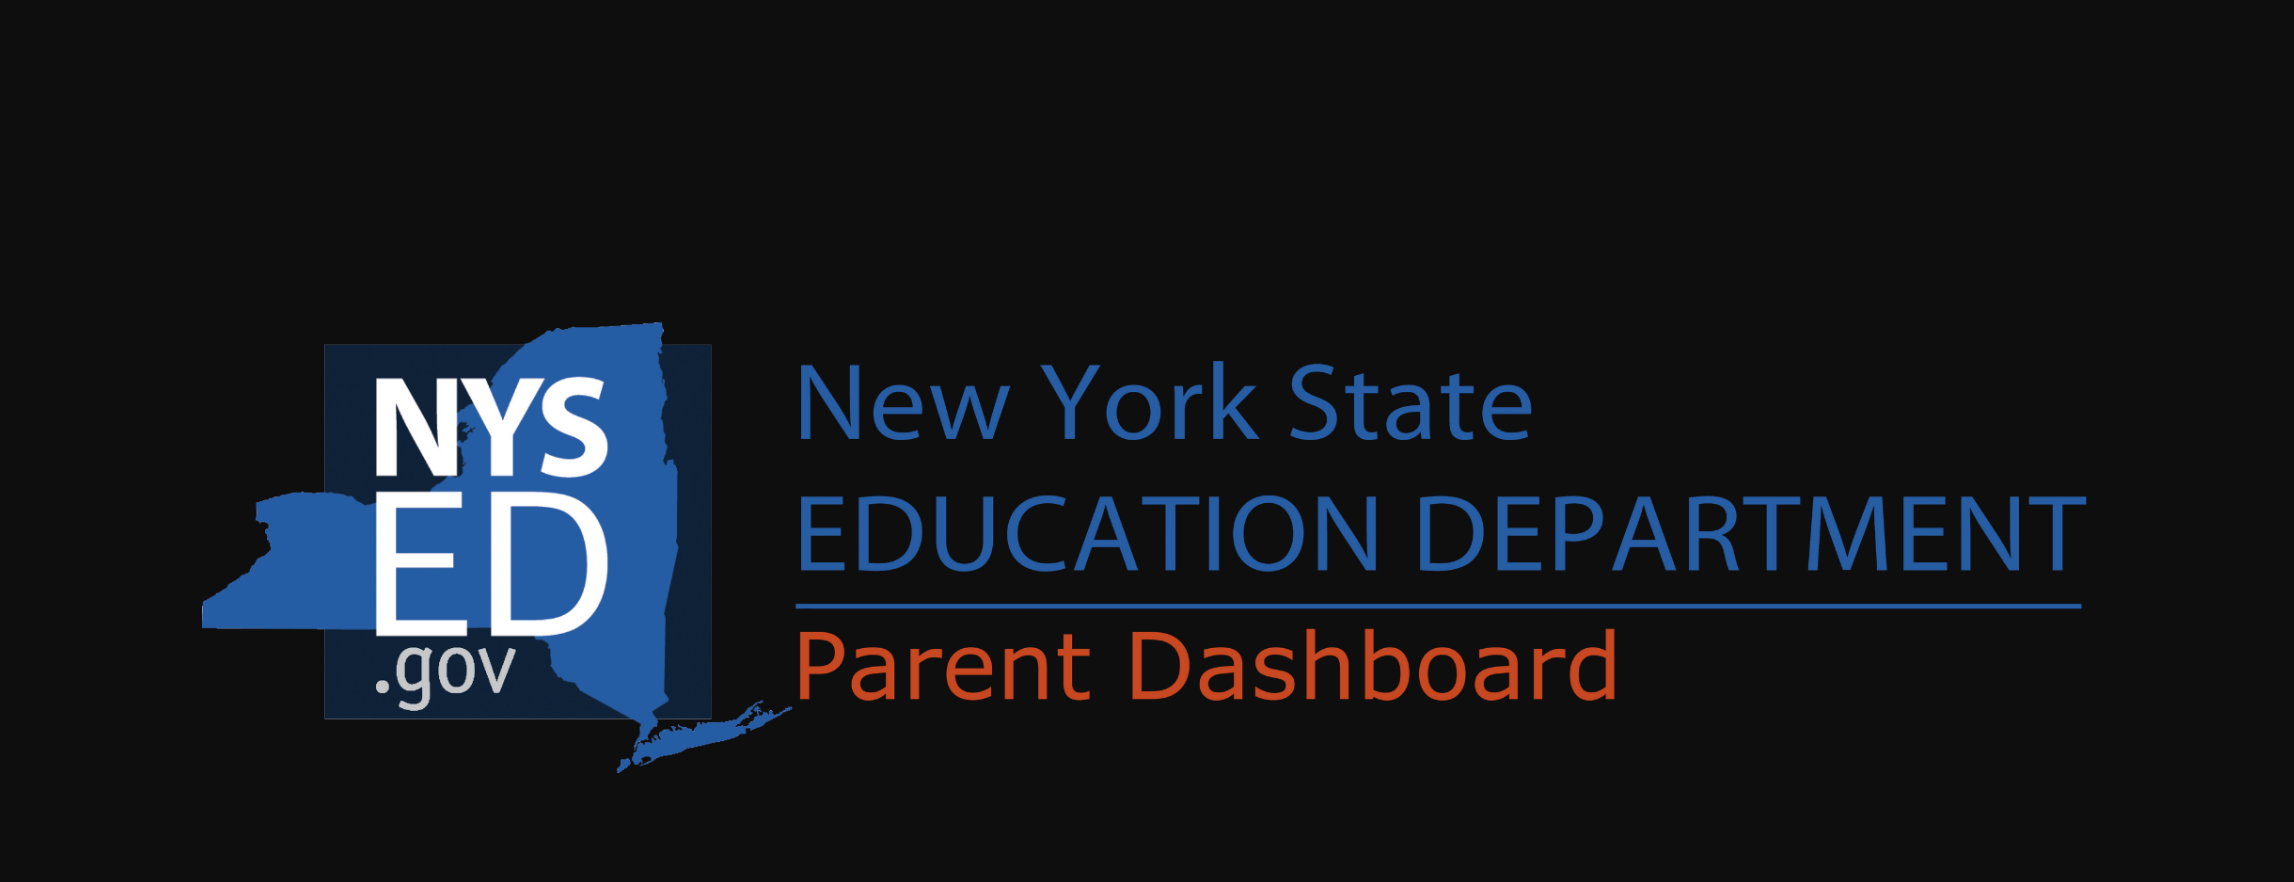 NYSED PARENT DASHBOARD